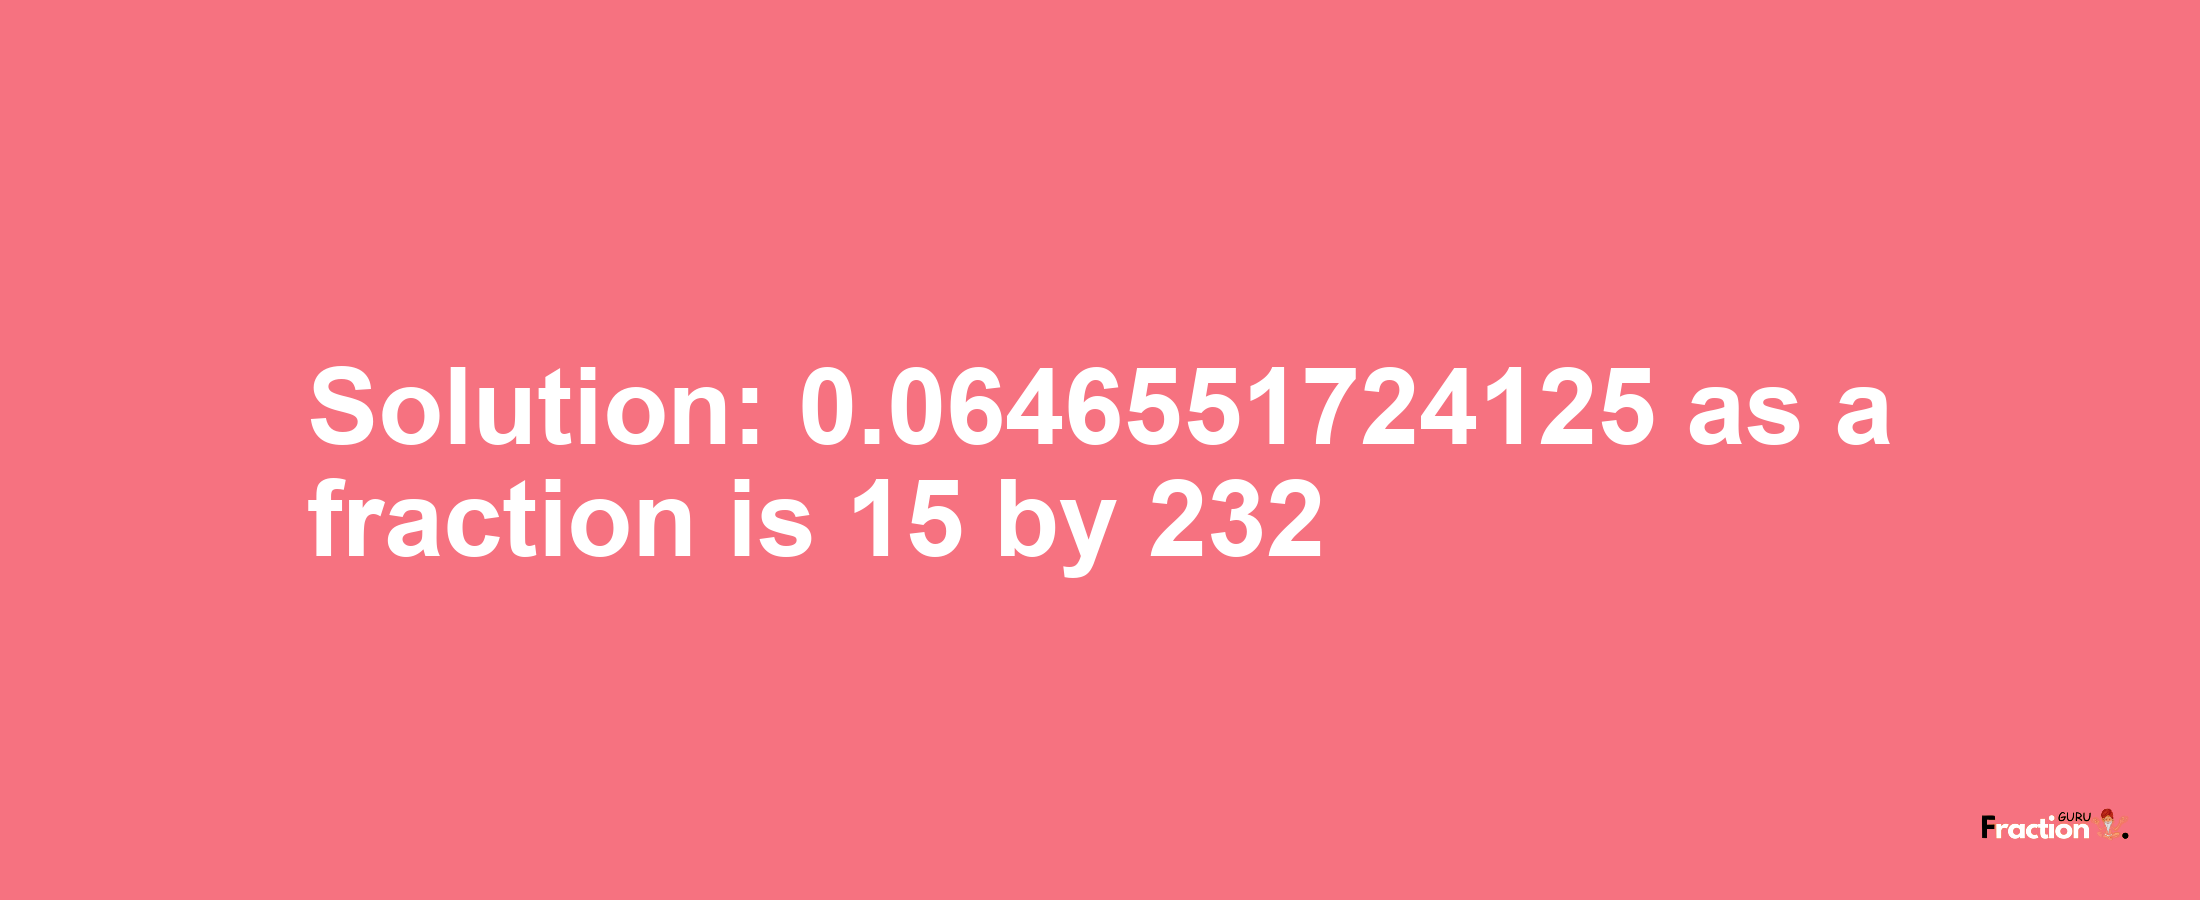 Solution:0.0646551724125 as a fraction is 15/232